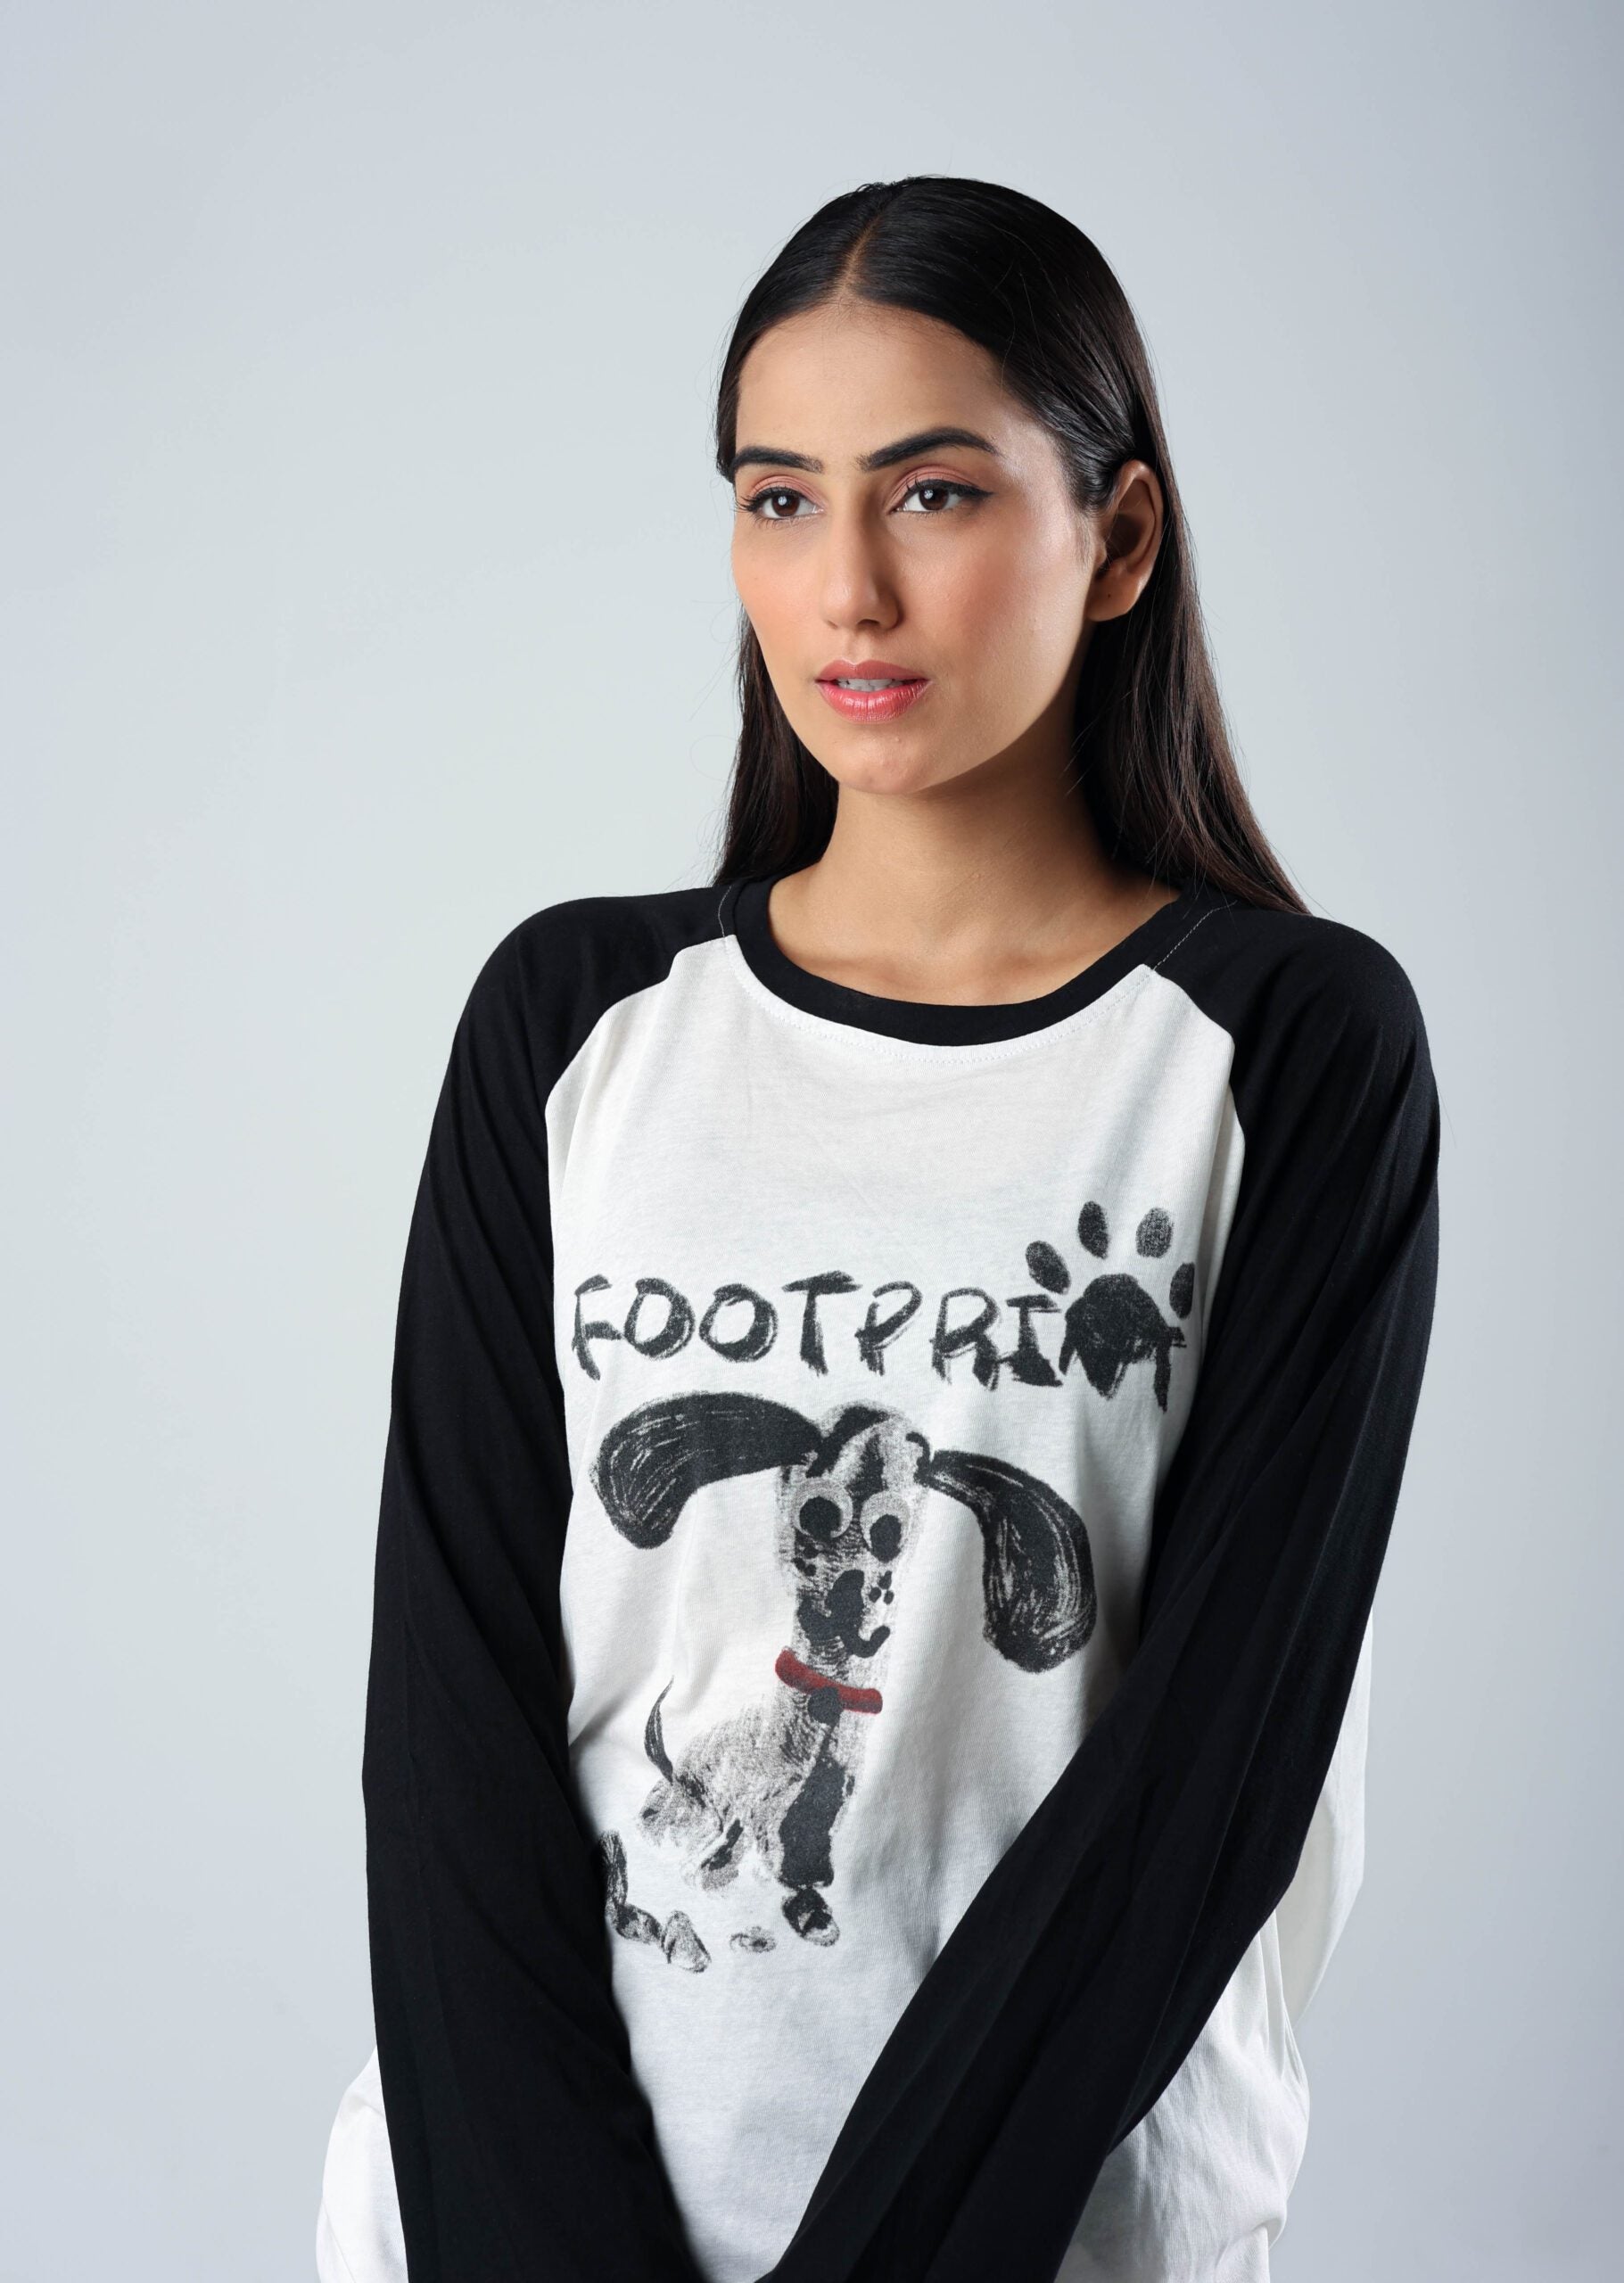 Cute Puppy Footprint Top T-shirt - Get Adorable - A Must-Have for Dog Lovers!